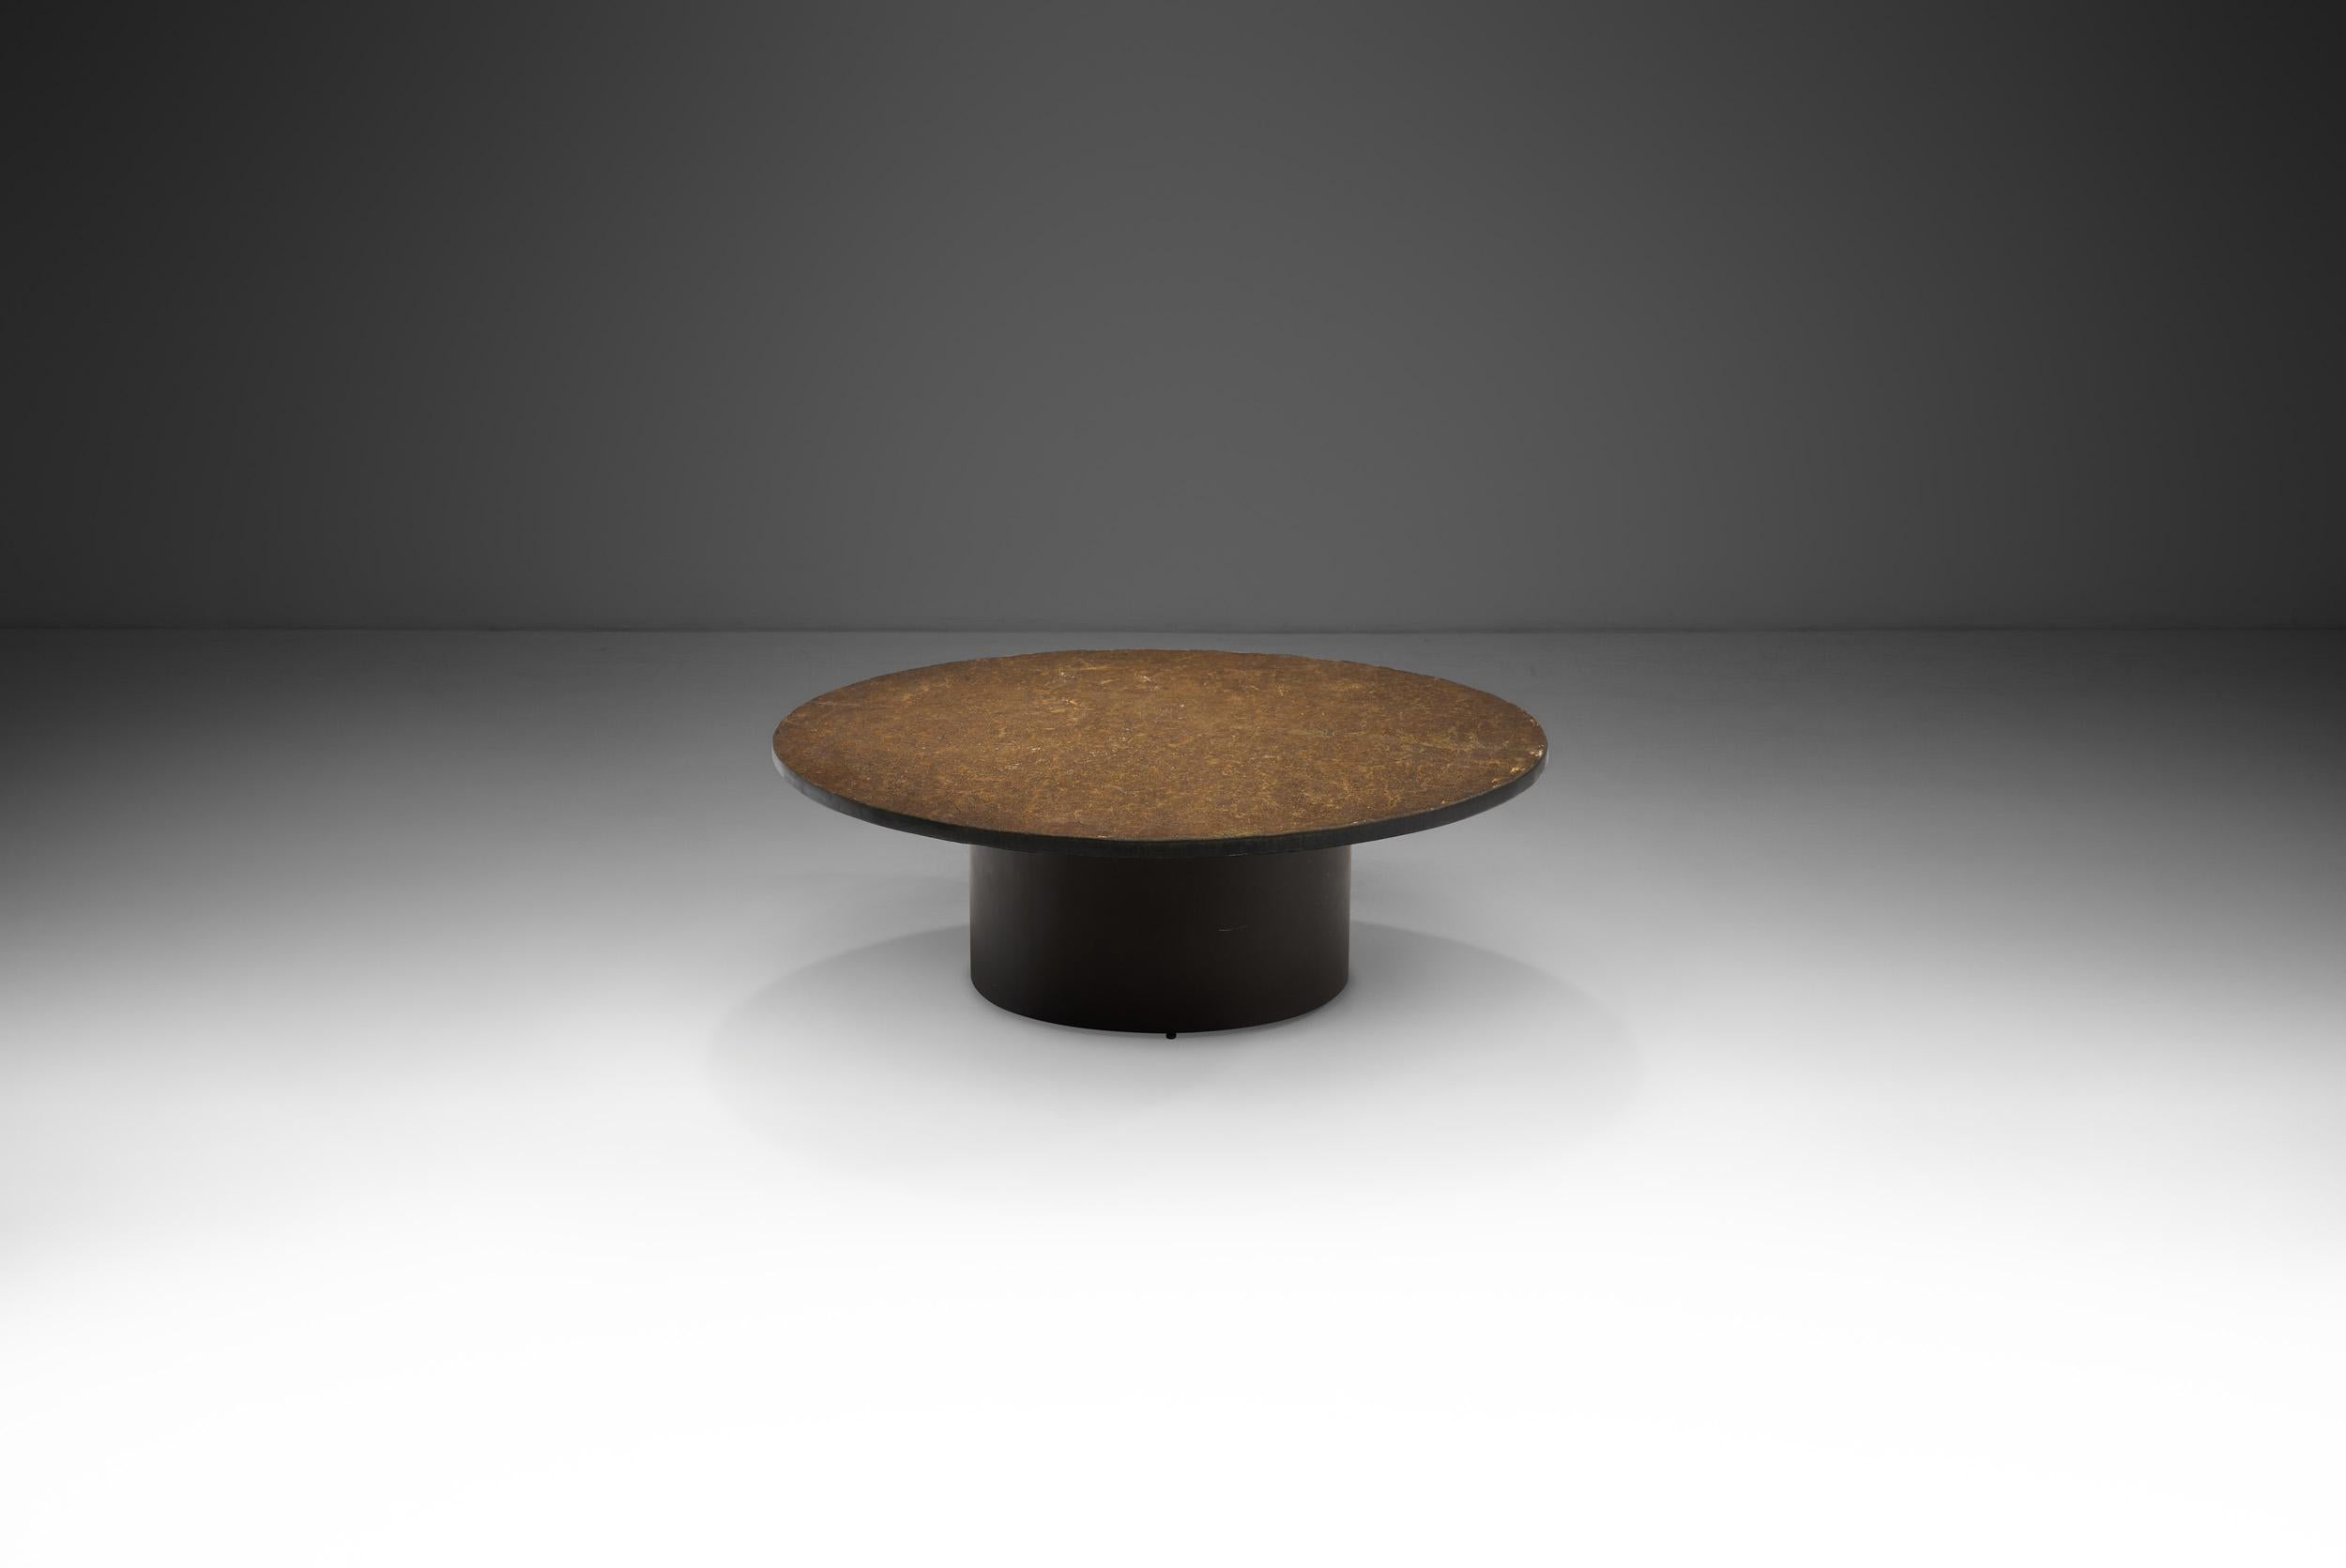 Among many other innovations, the Mid-Century Modern movement brought new materials and shapes into existence. Utilizing the natural qualities of stone and combining it with the expertise of its master craftsman, this coffee table is a unique piece